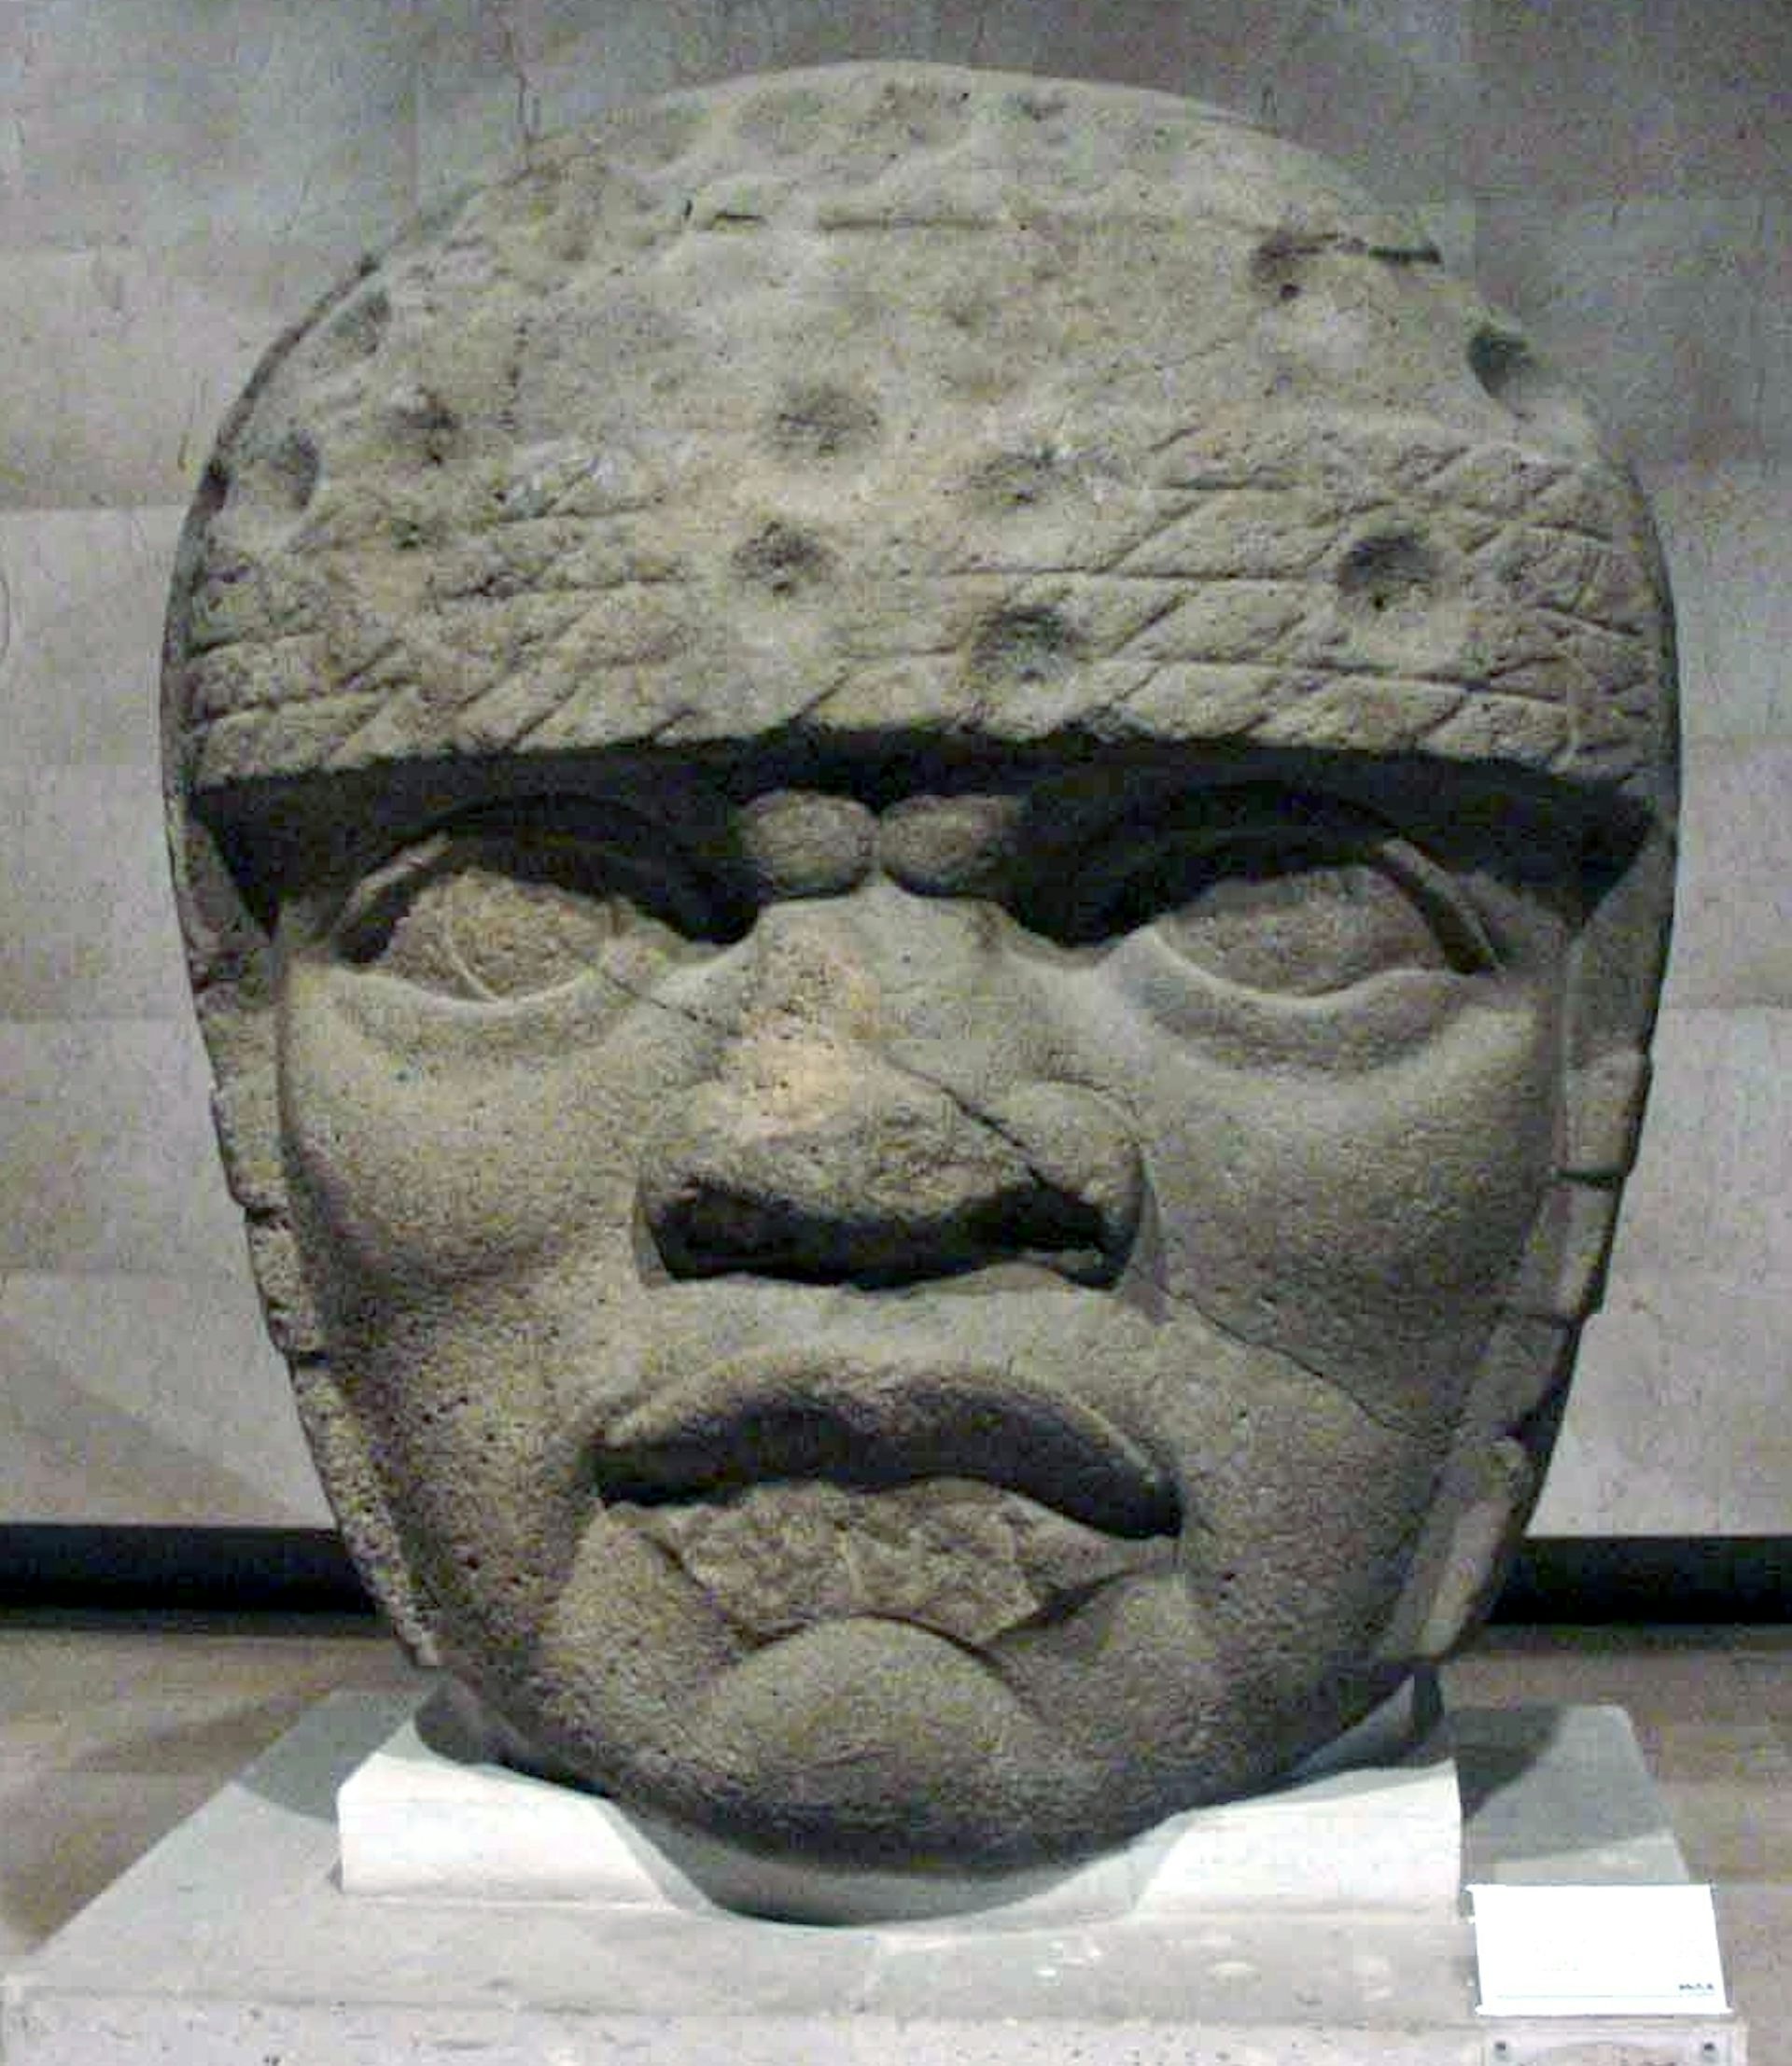 olmec carved stone heads on display in us